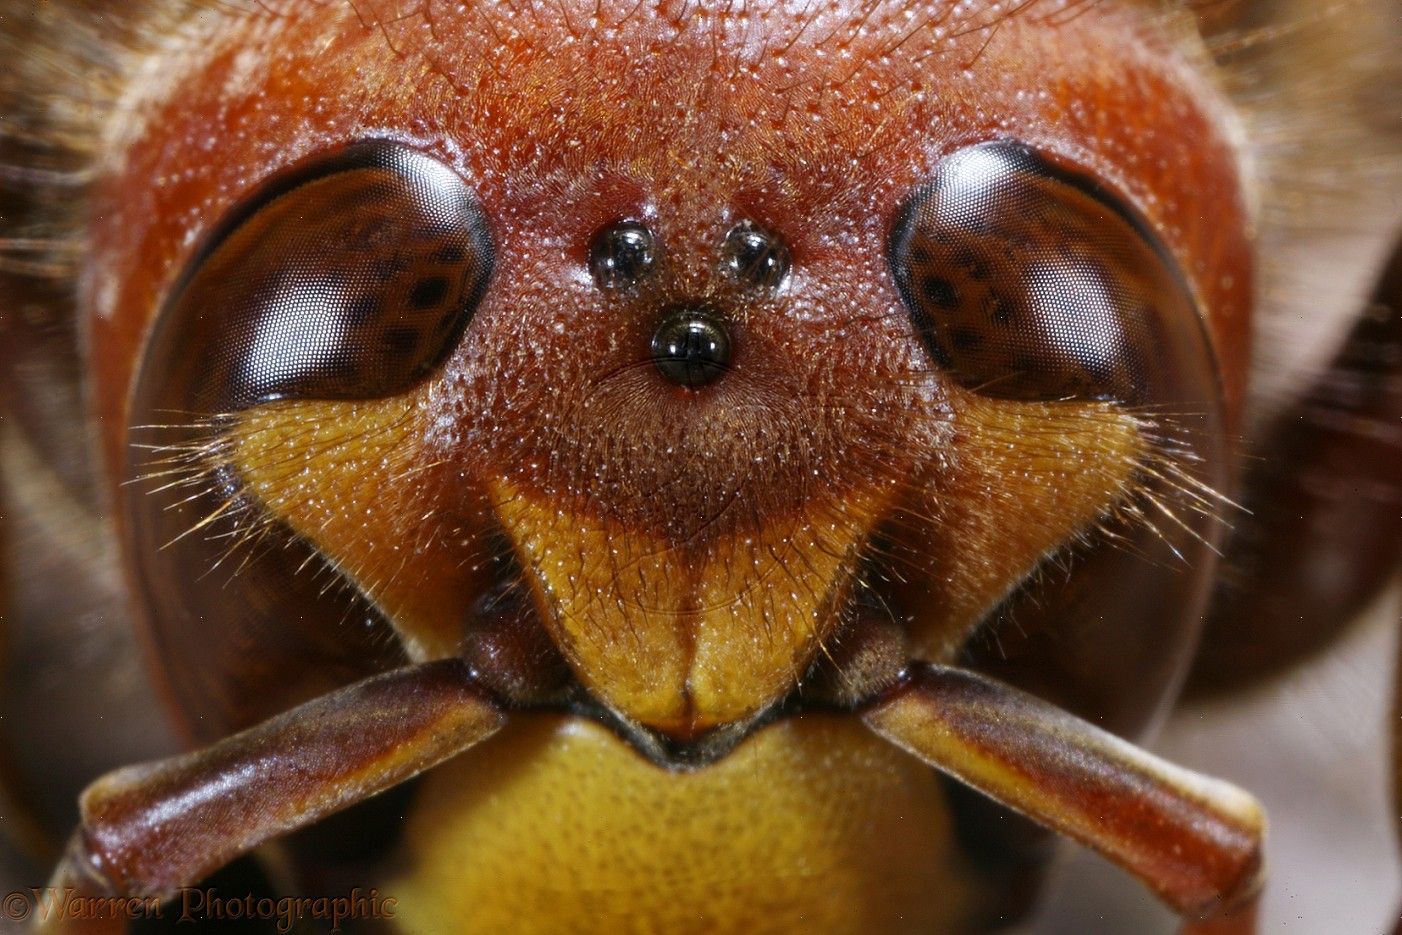 Do all bees have 5 eyes?